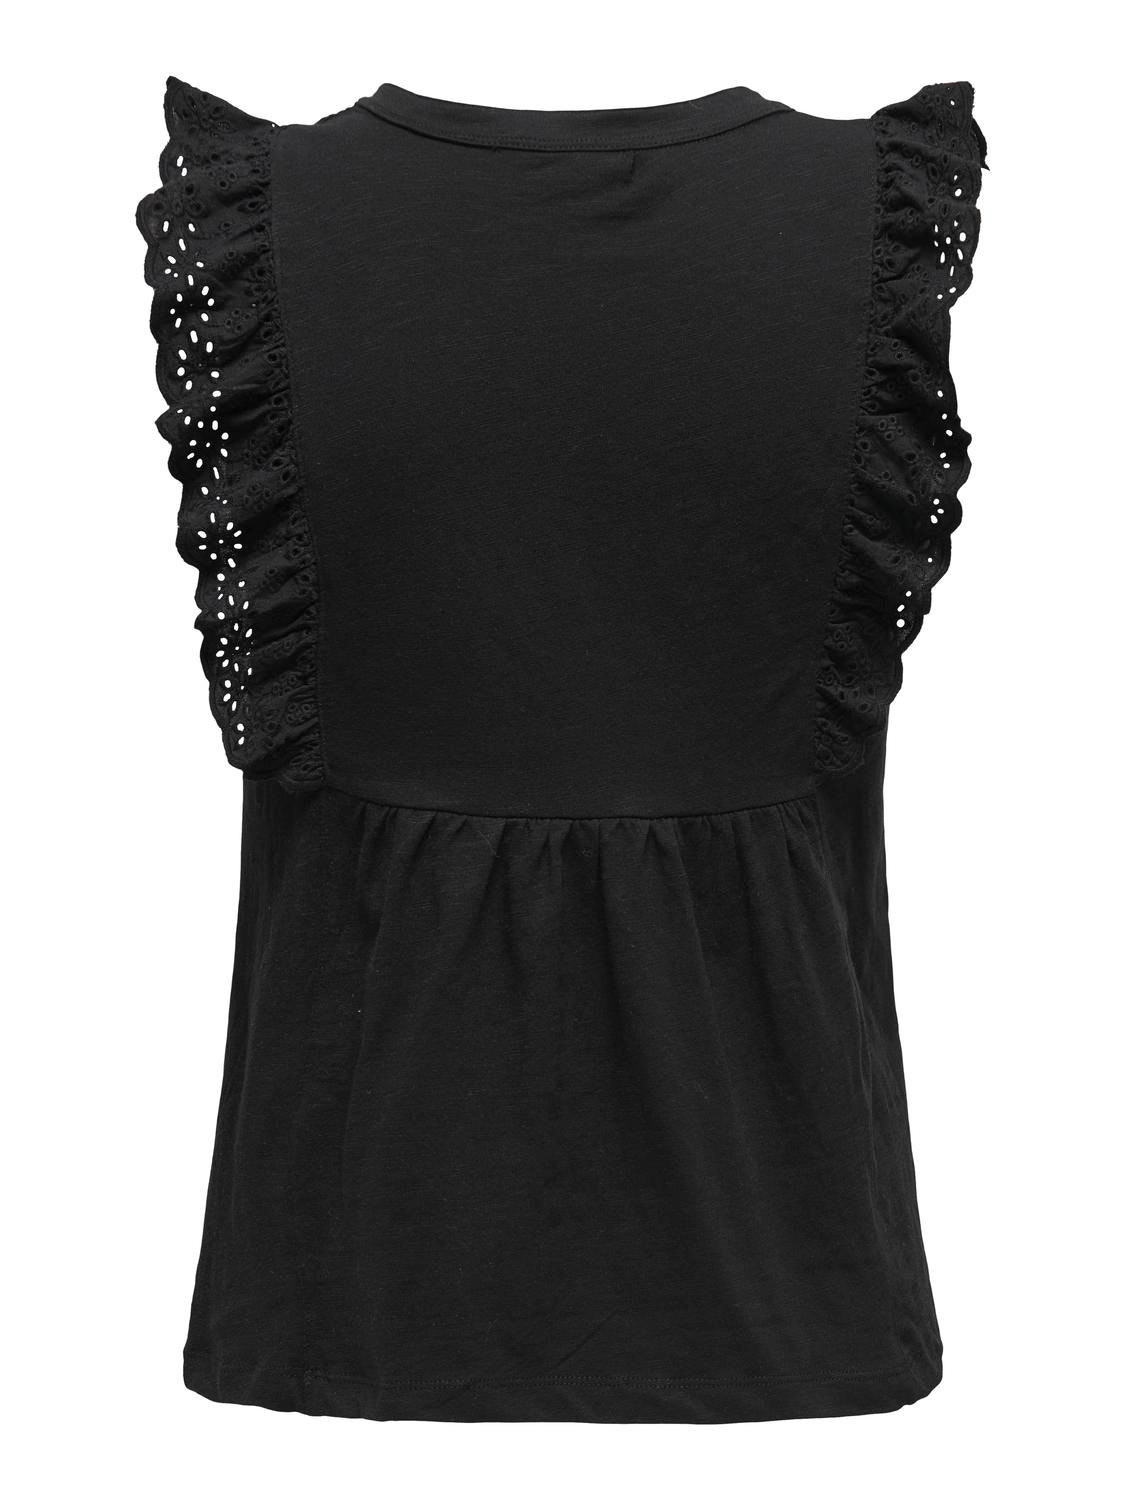 ONLY Top with lace detail -Black - 15333667